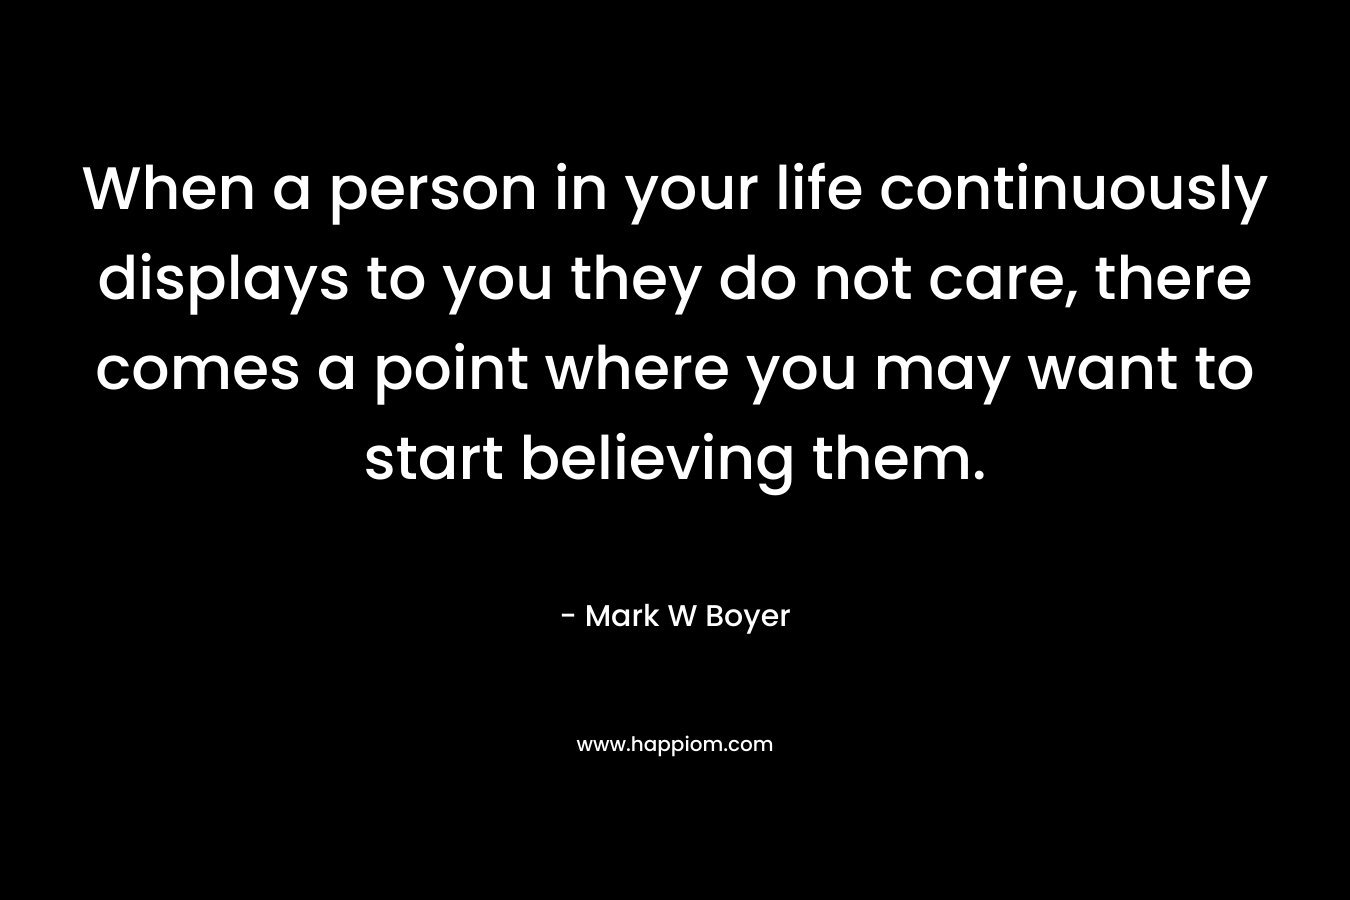 When a person in your life continuously displays to you they do not care, there comes a point where you may want to start believing them.